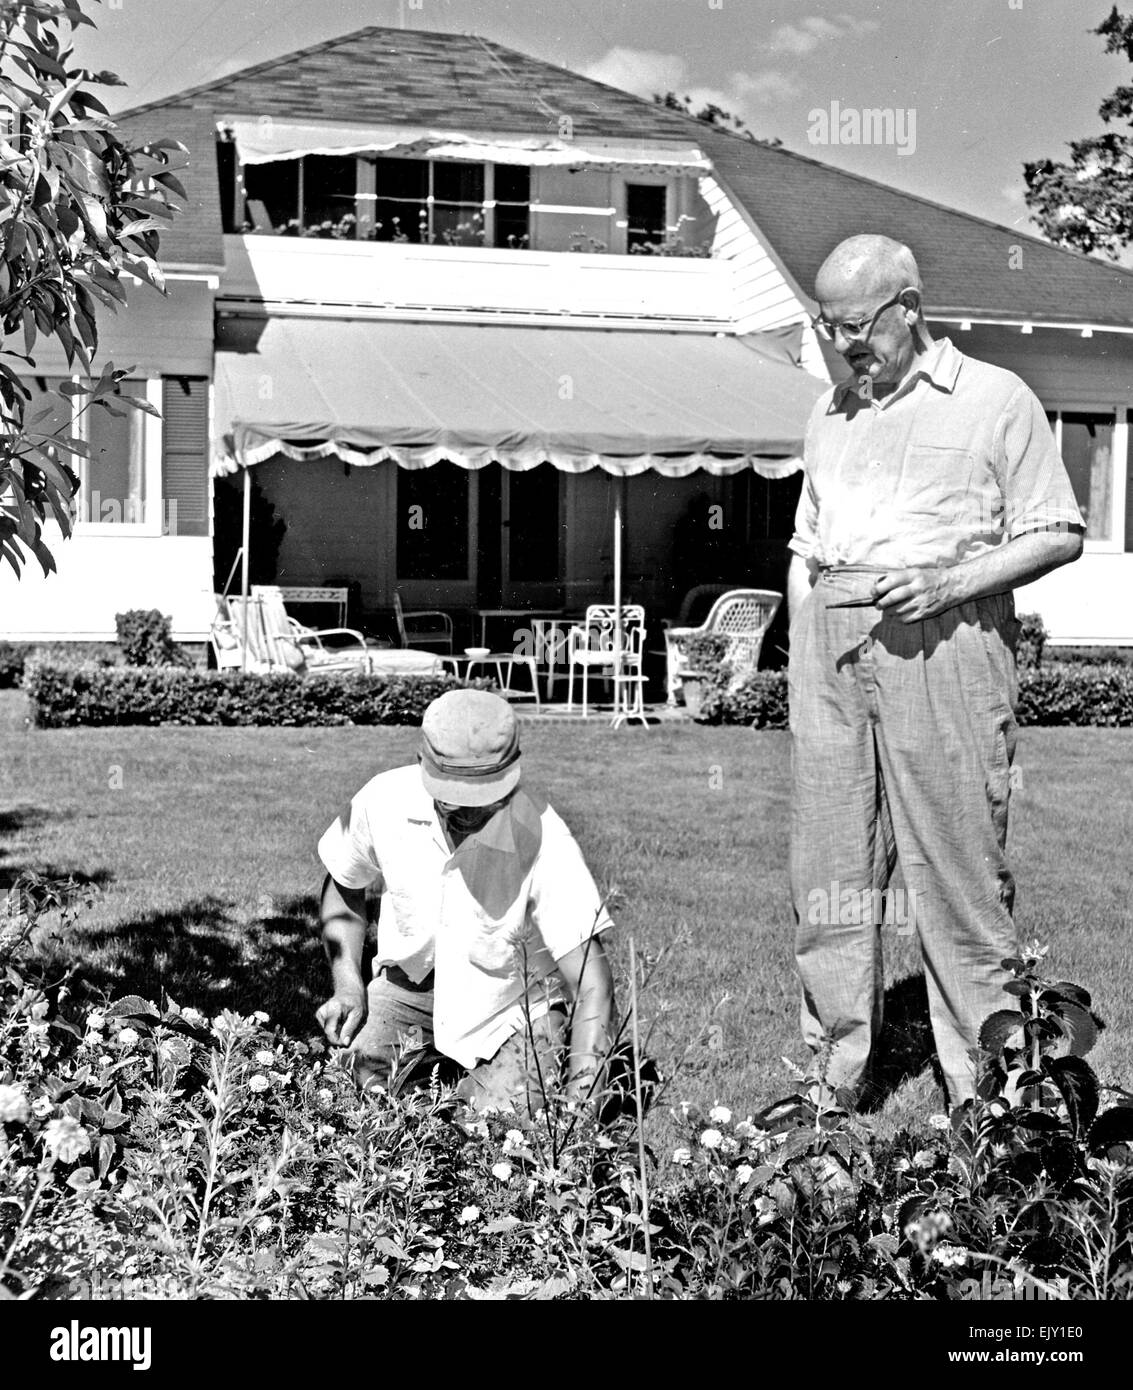 P.G.WODEHOUSE (1881-1975) English humourist at his home in Basket Neck Lane, Remsenburg, New York, about 1956. Photo Graphic House 6640J Stock Photo